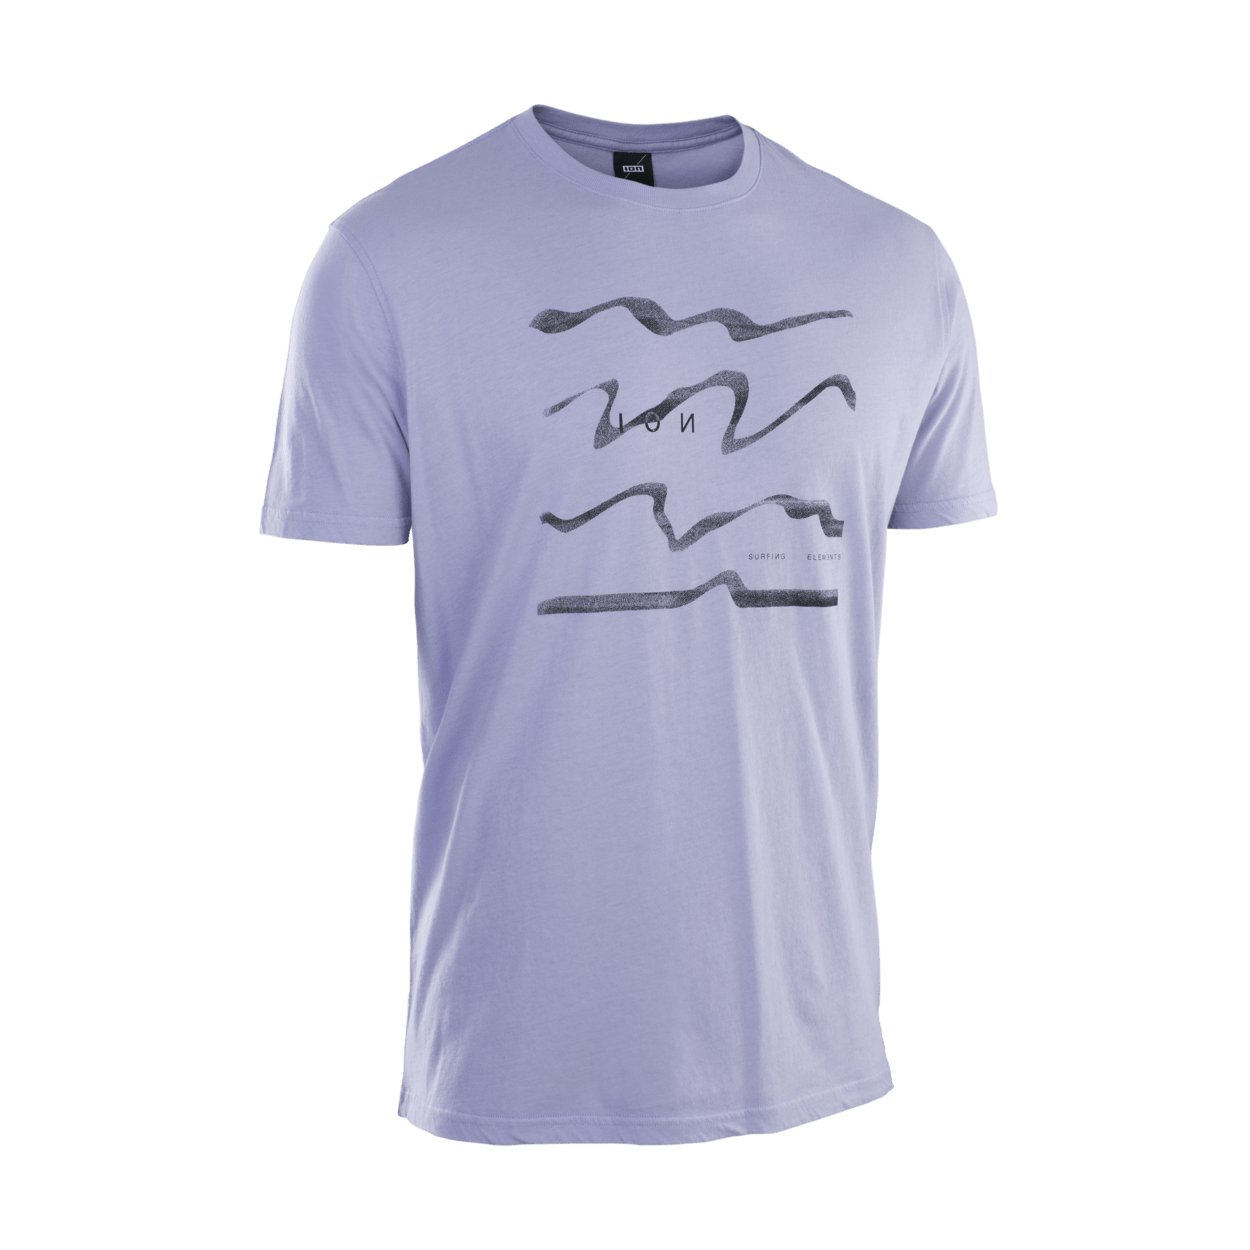 ION Tee Addicted SS men 2023 - Worthing Watersports - 9010583102368 - Apparel - ION Bike